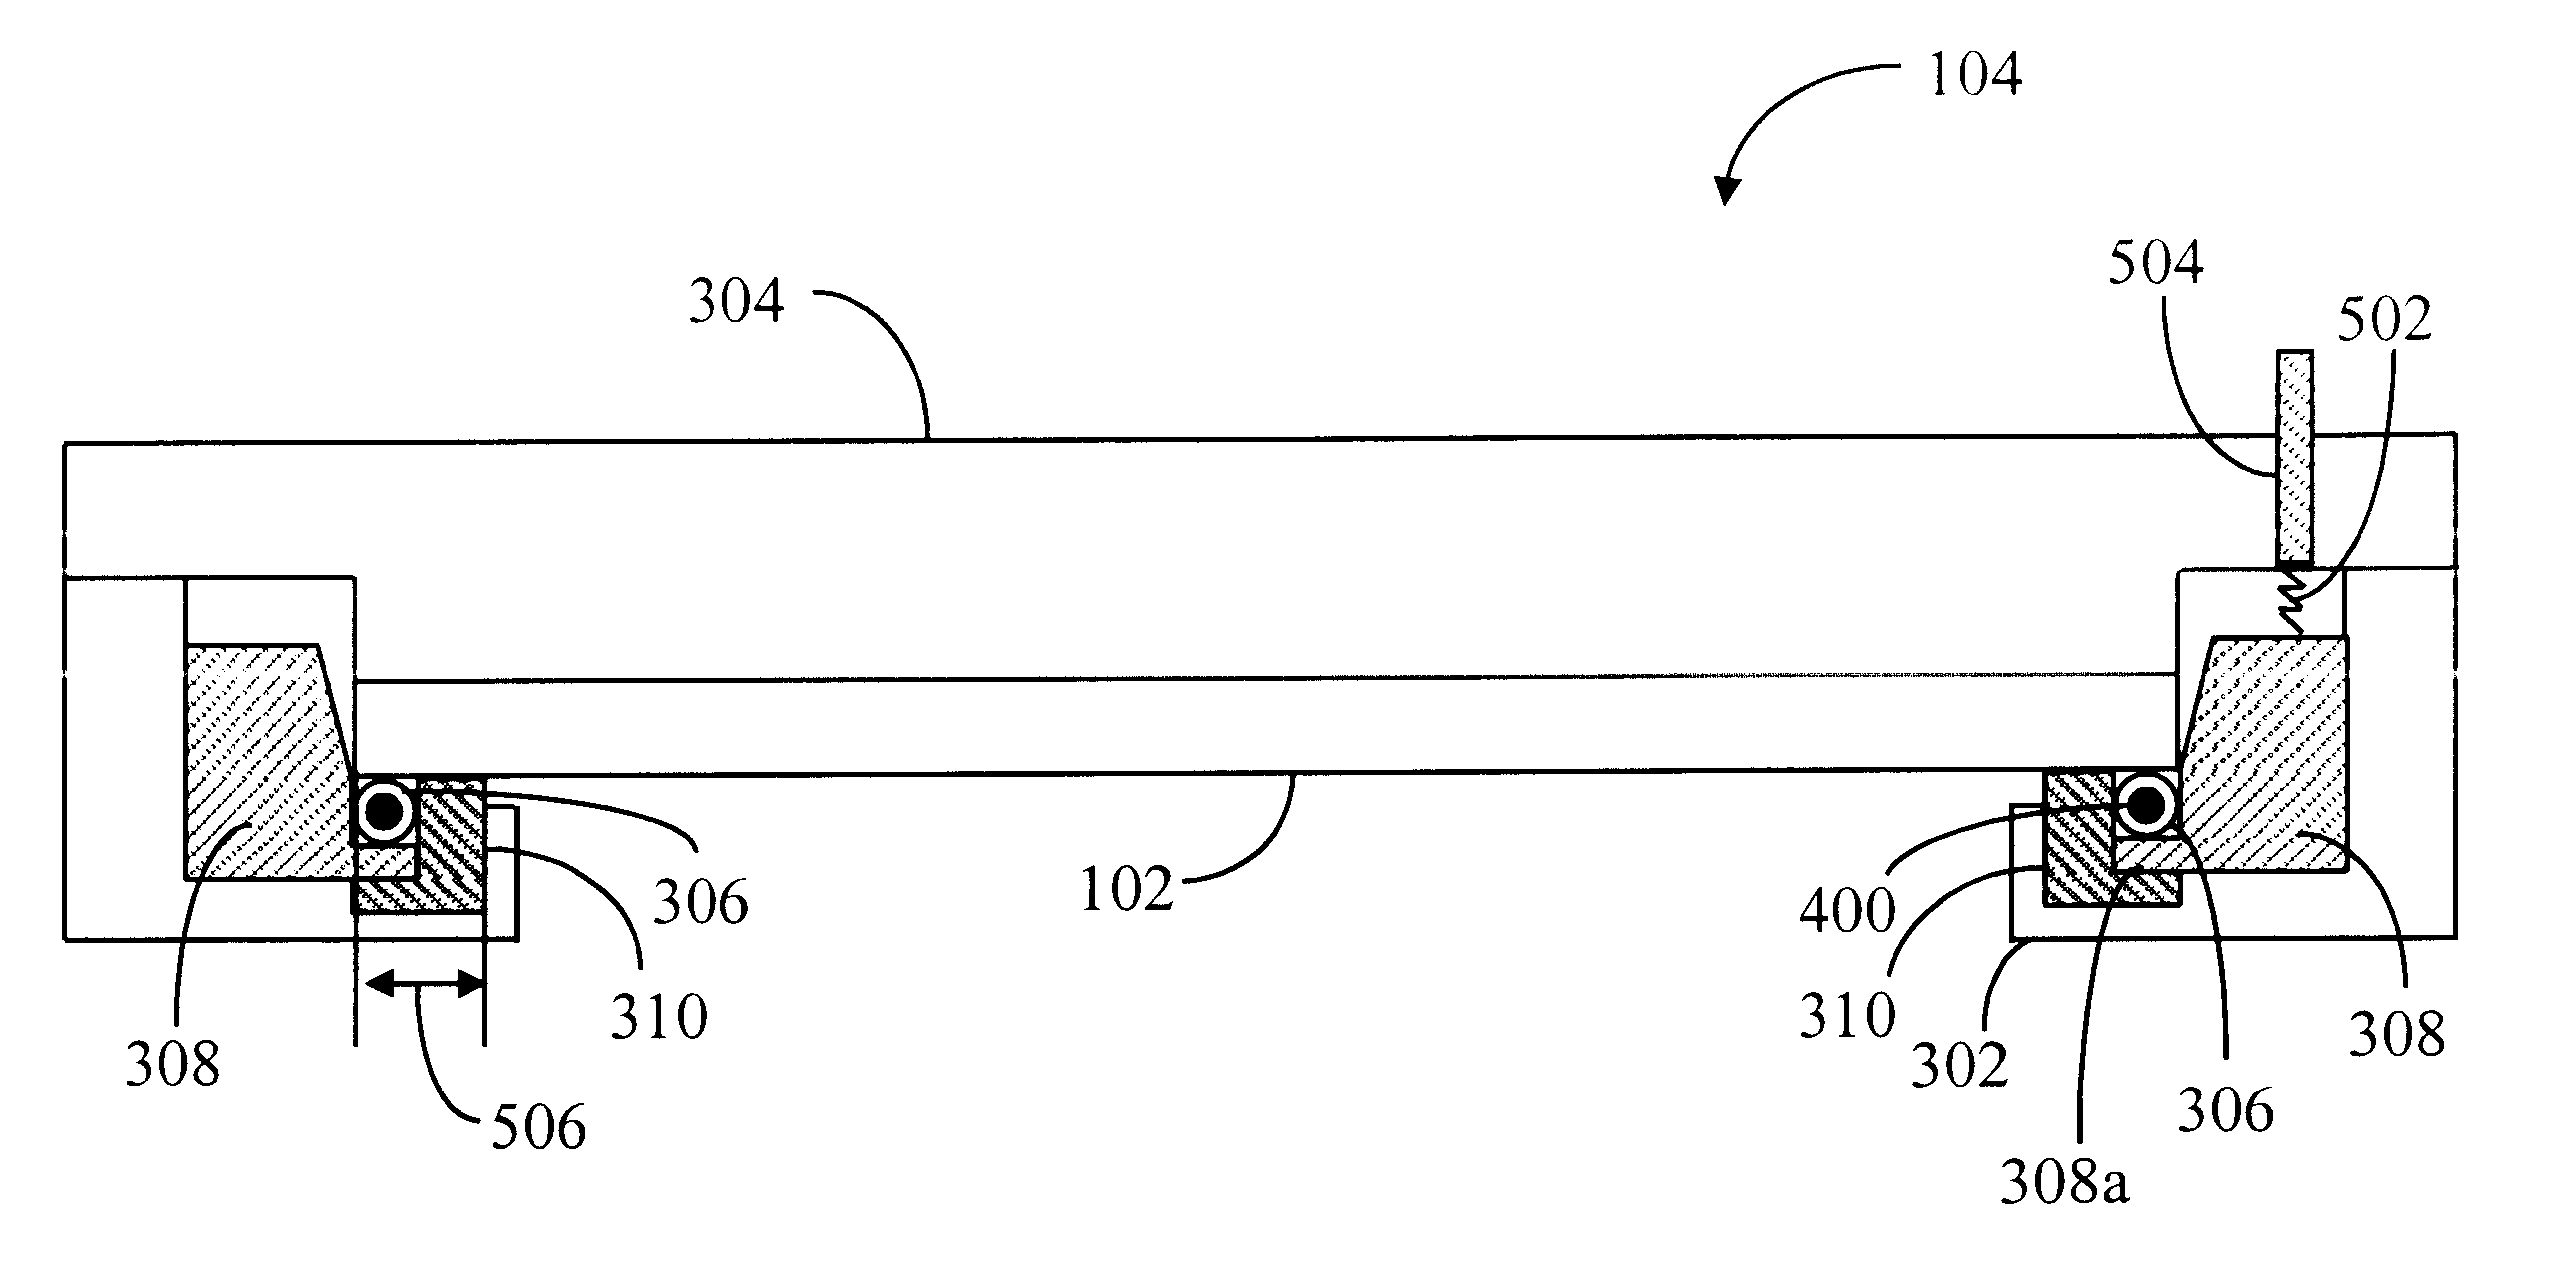 Methods and apparatus for holding and positioning semiconductor workpieces during electropolishing and/or electroplating of the workpieces